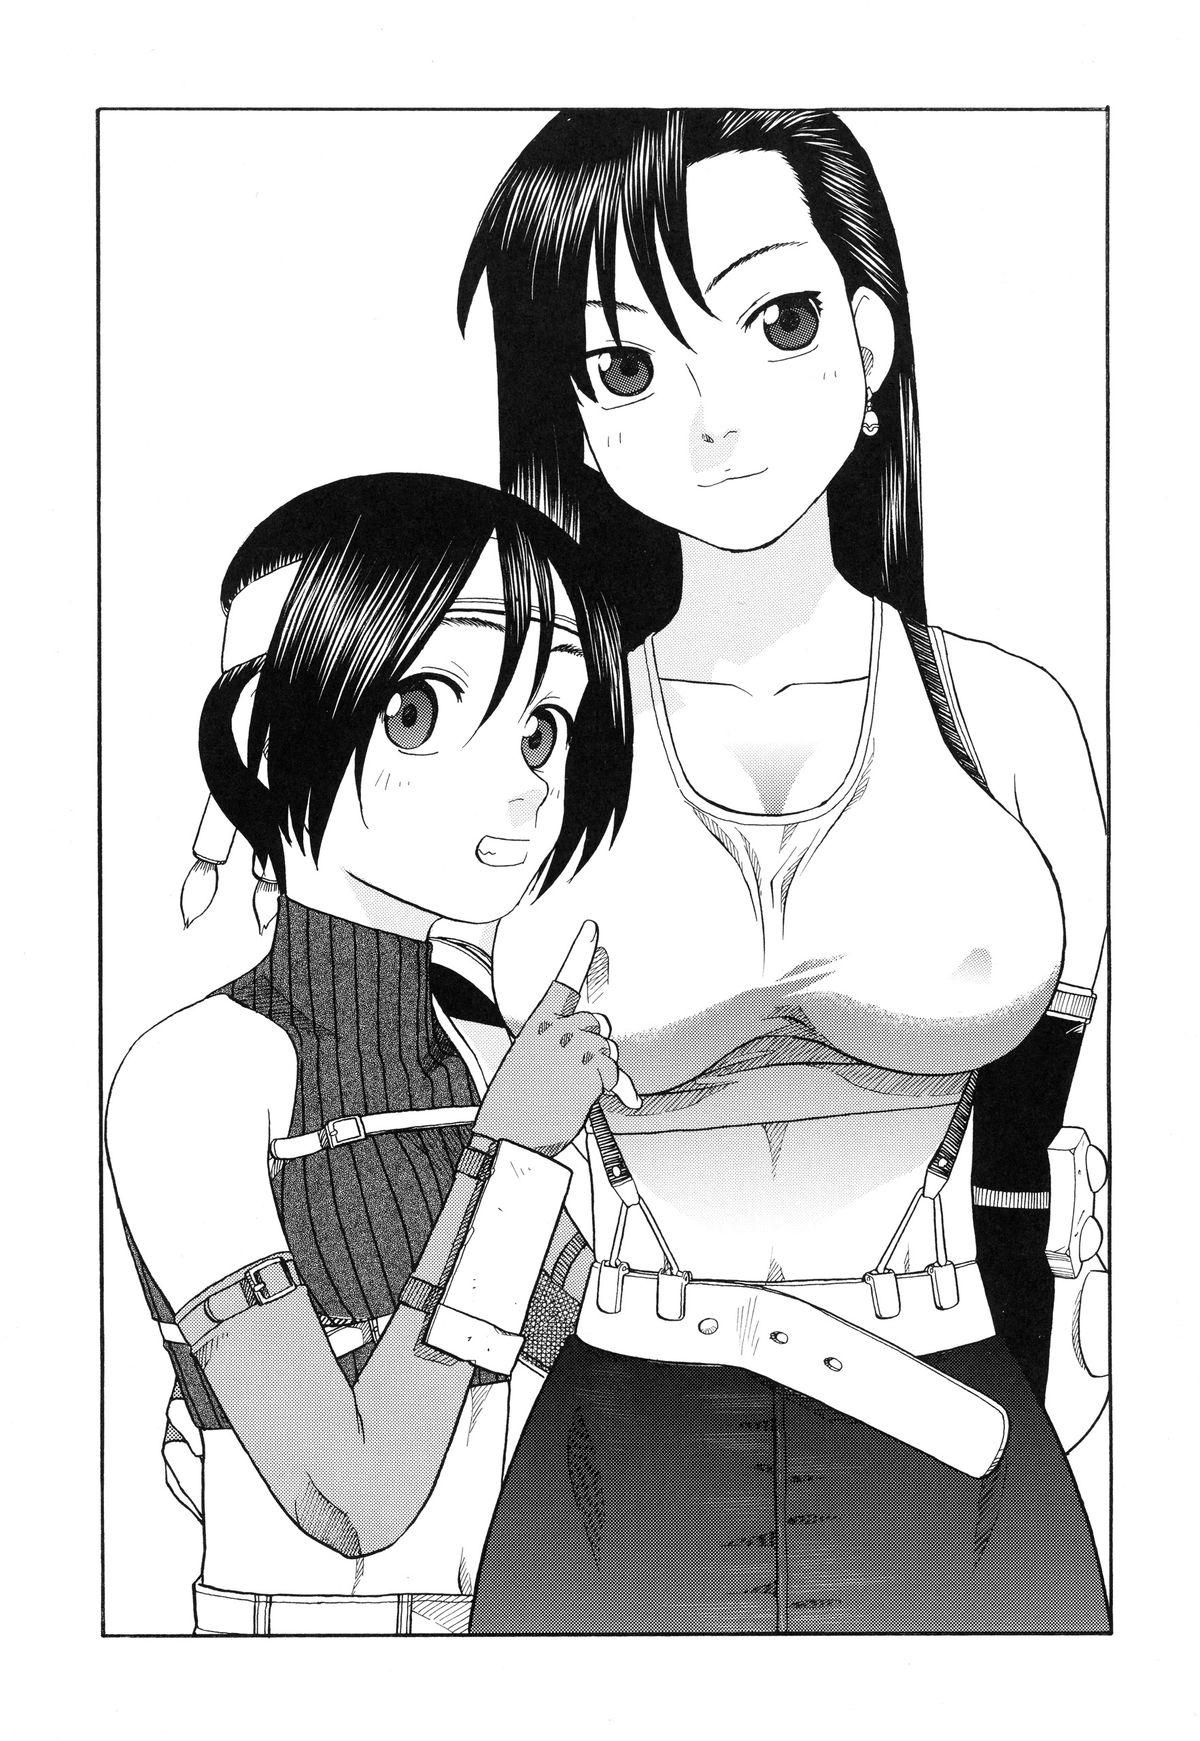 Thai Tifa to Yuffie to Yojouhan - Final fantasy vii Stepmother - Page 3